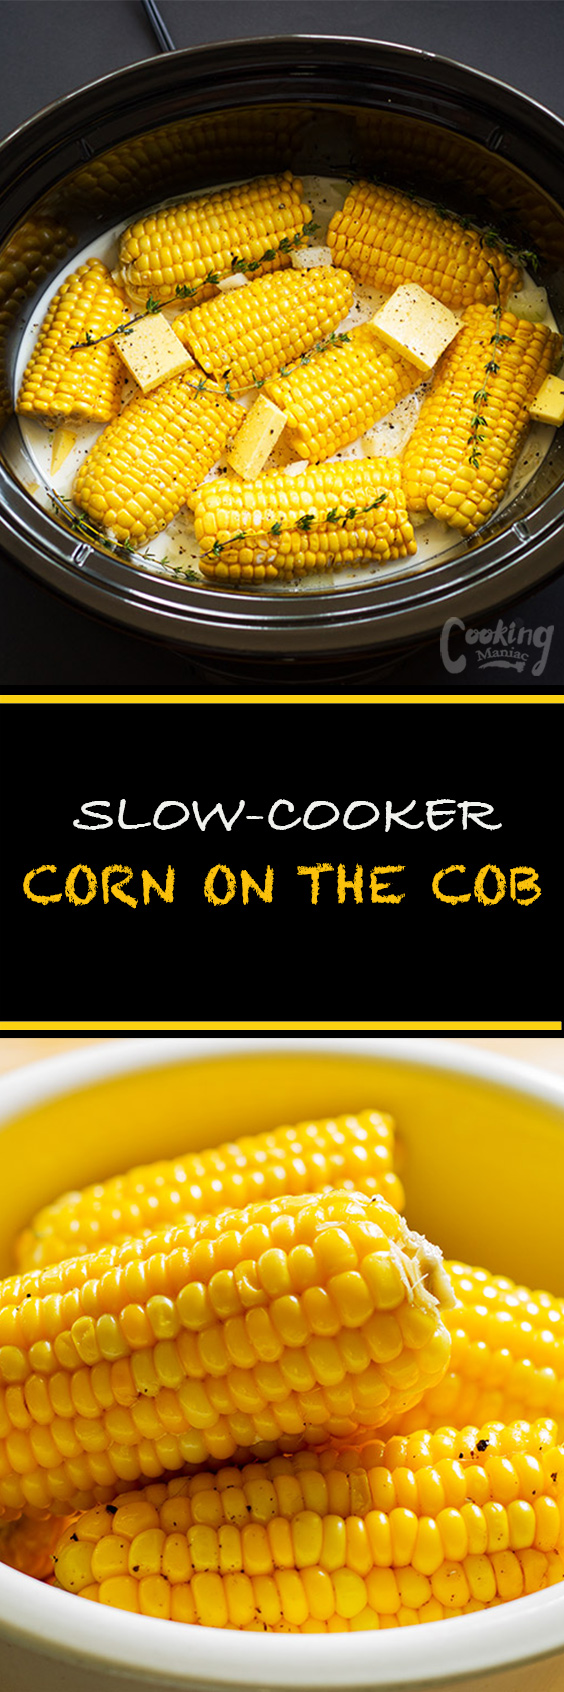 slow-cooker_-corn-on-the-cob_pin